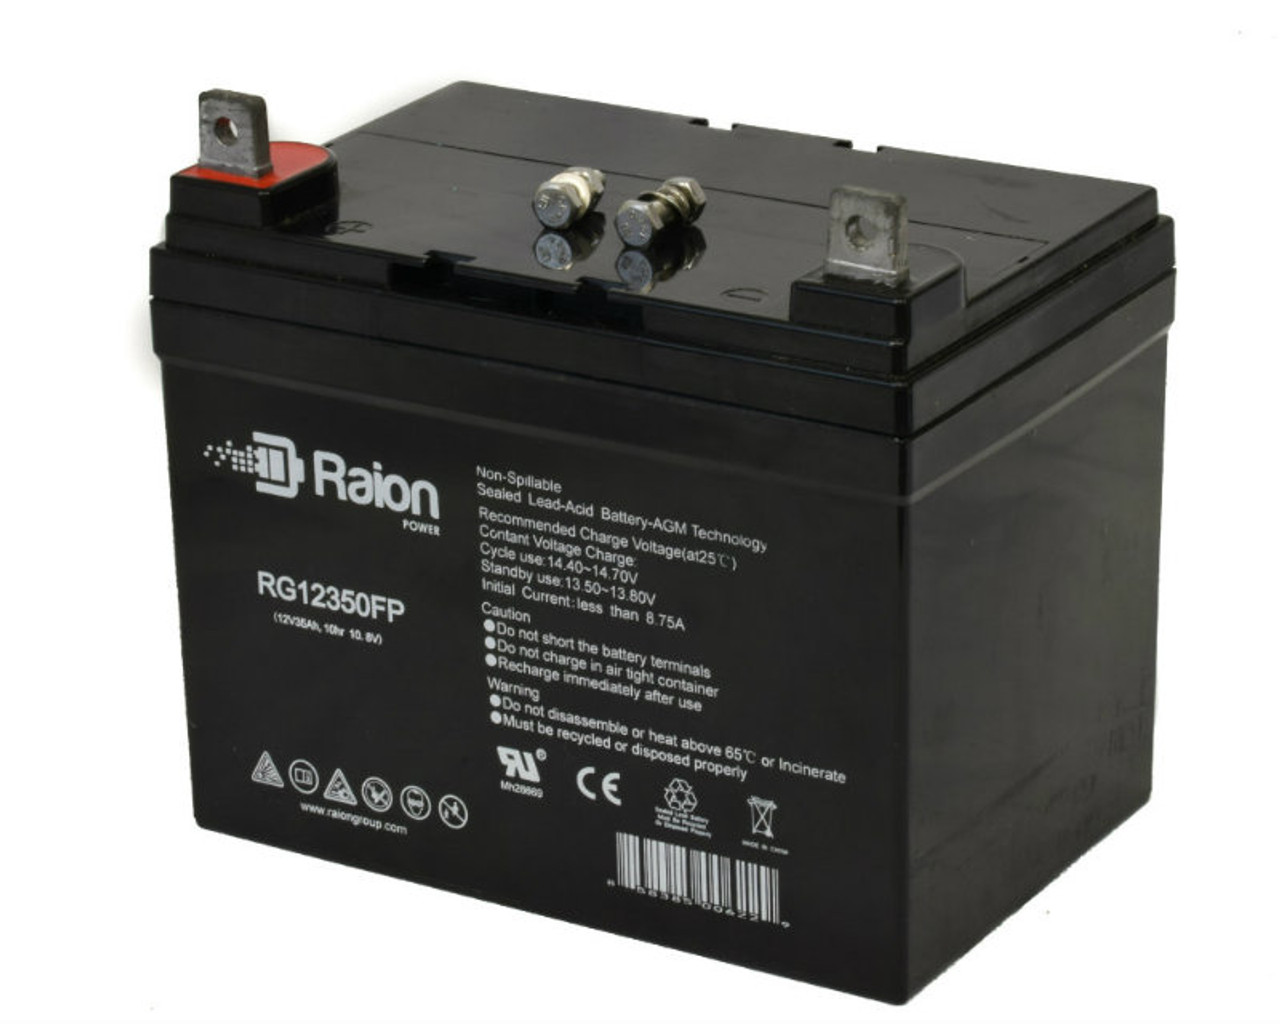 Raion Power Replacement 12V 35Ah Battery for Ford Motor Co. LGT145 - 1 Pack